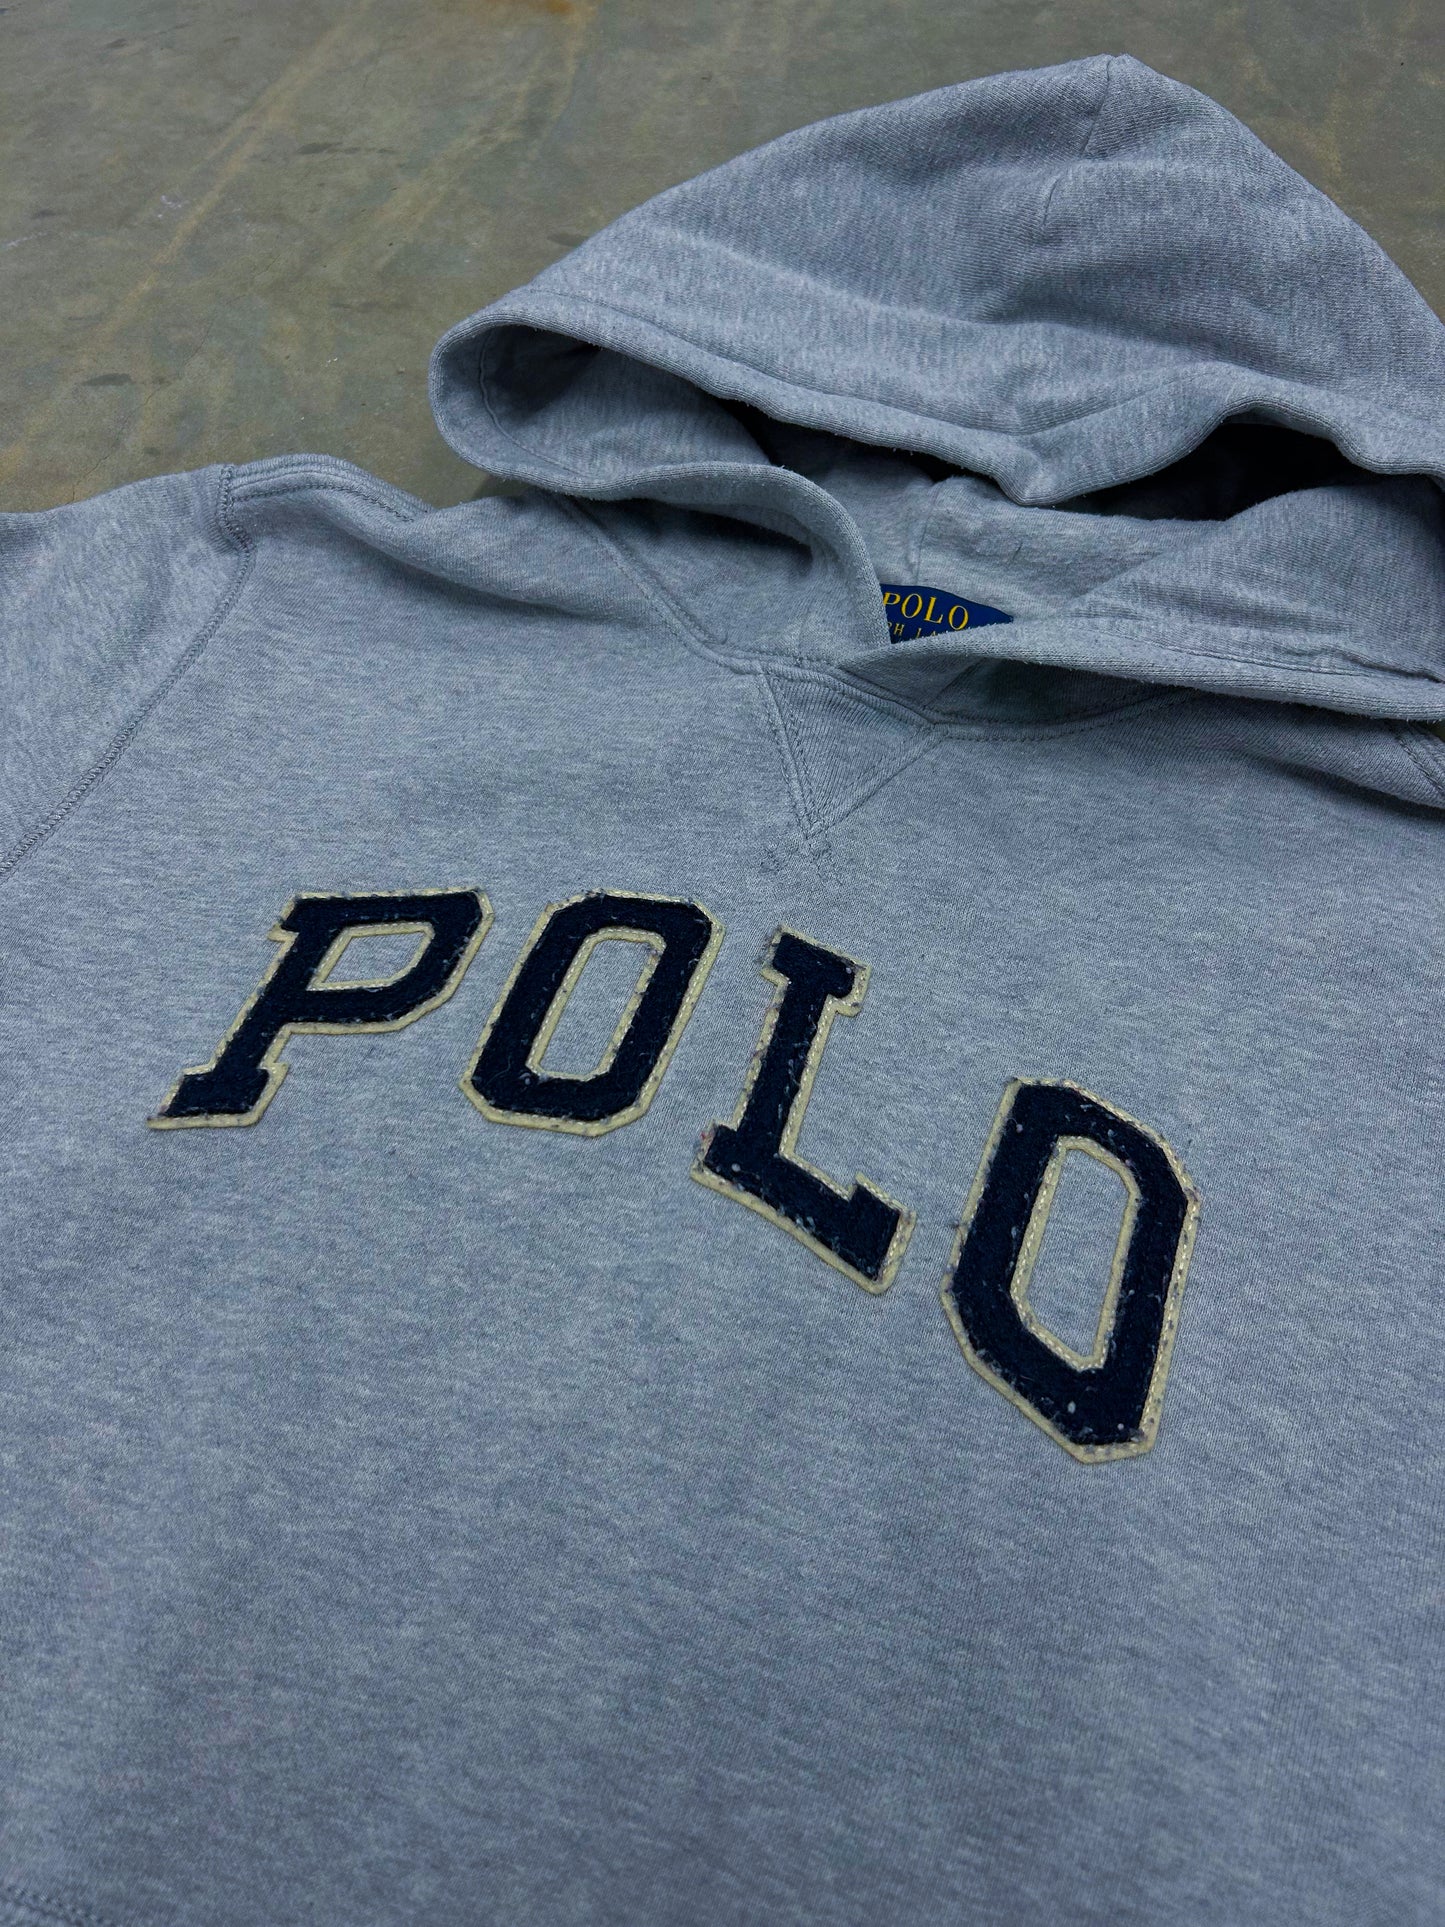 Polo Vintage Hoodie | Fittet XS